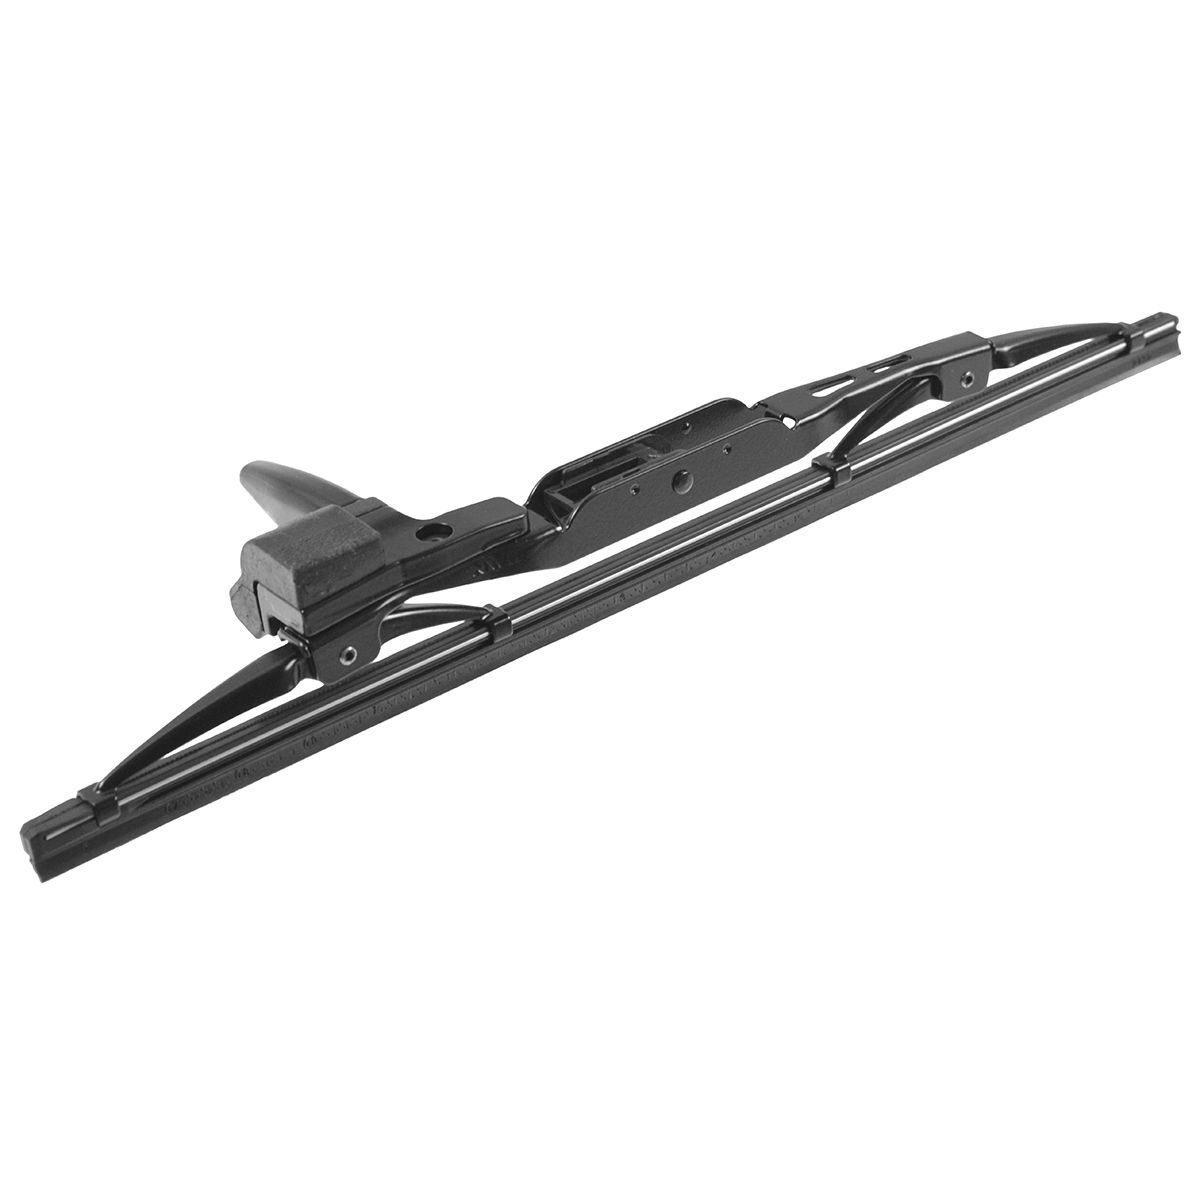 OEM 852420C010 Rear Wiper Blade Assembly Direct Fit for Toyota Sequoia Brand New 2008 Toyota Sequoia Rear Wiper Blade Size